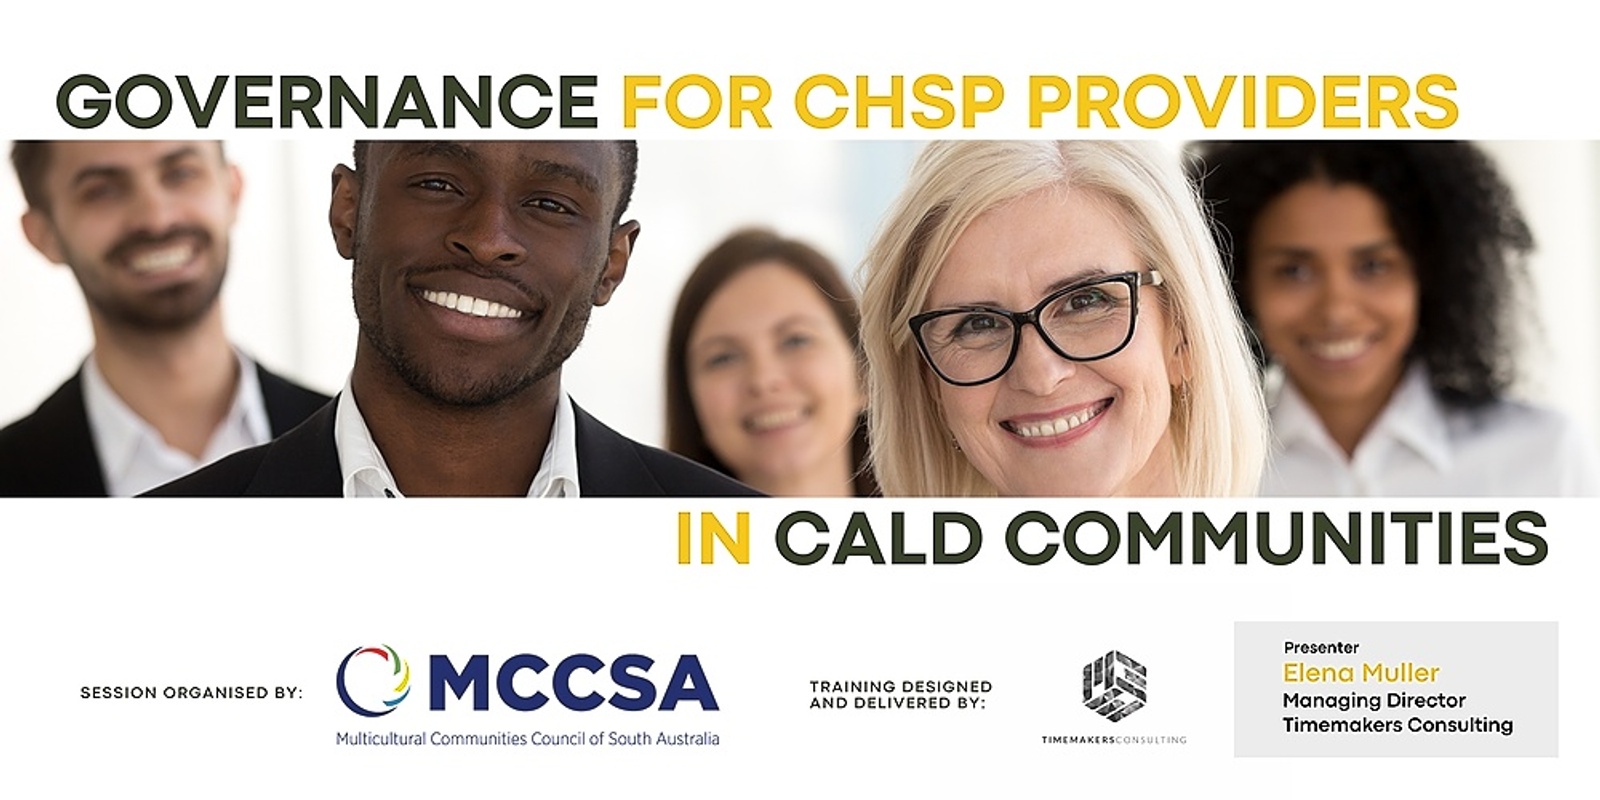 Governance for CHSP Service Providers in CALD Communities: What You Need to Know